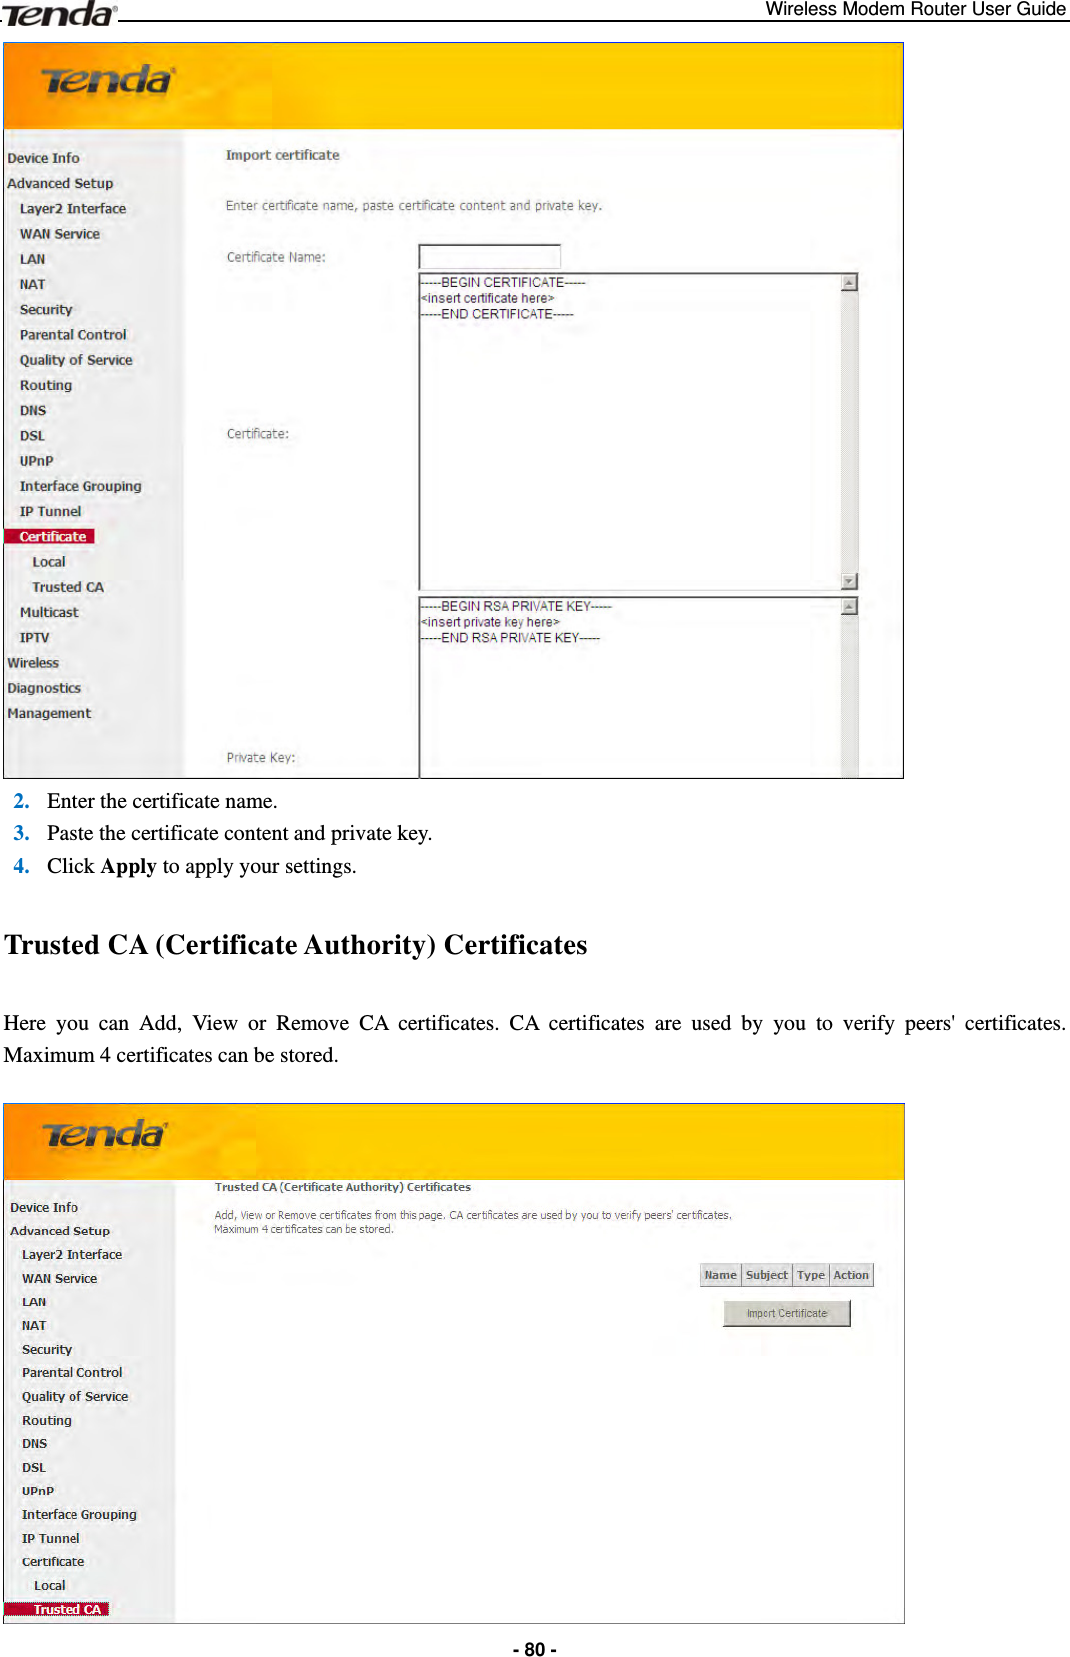 Wireless Modem Router User Guide  - 80 - 2. Enter the certificate name. 3. Paste the certificate content and private key. 4. Click Apply to apply your settings. Trusted CA (Certificate Authority) Certificates Here you can Add, View or Remove CA certificates. CA certificates are used by you to verify peers&apos; certificates. Maximum 4 certificates can be stored.   